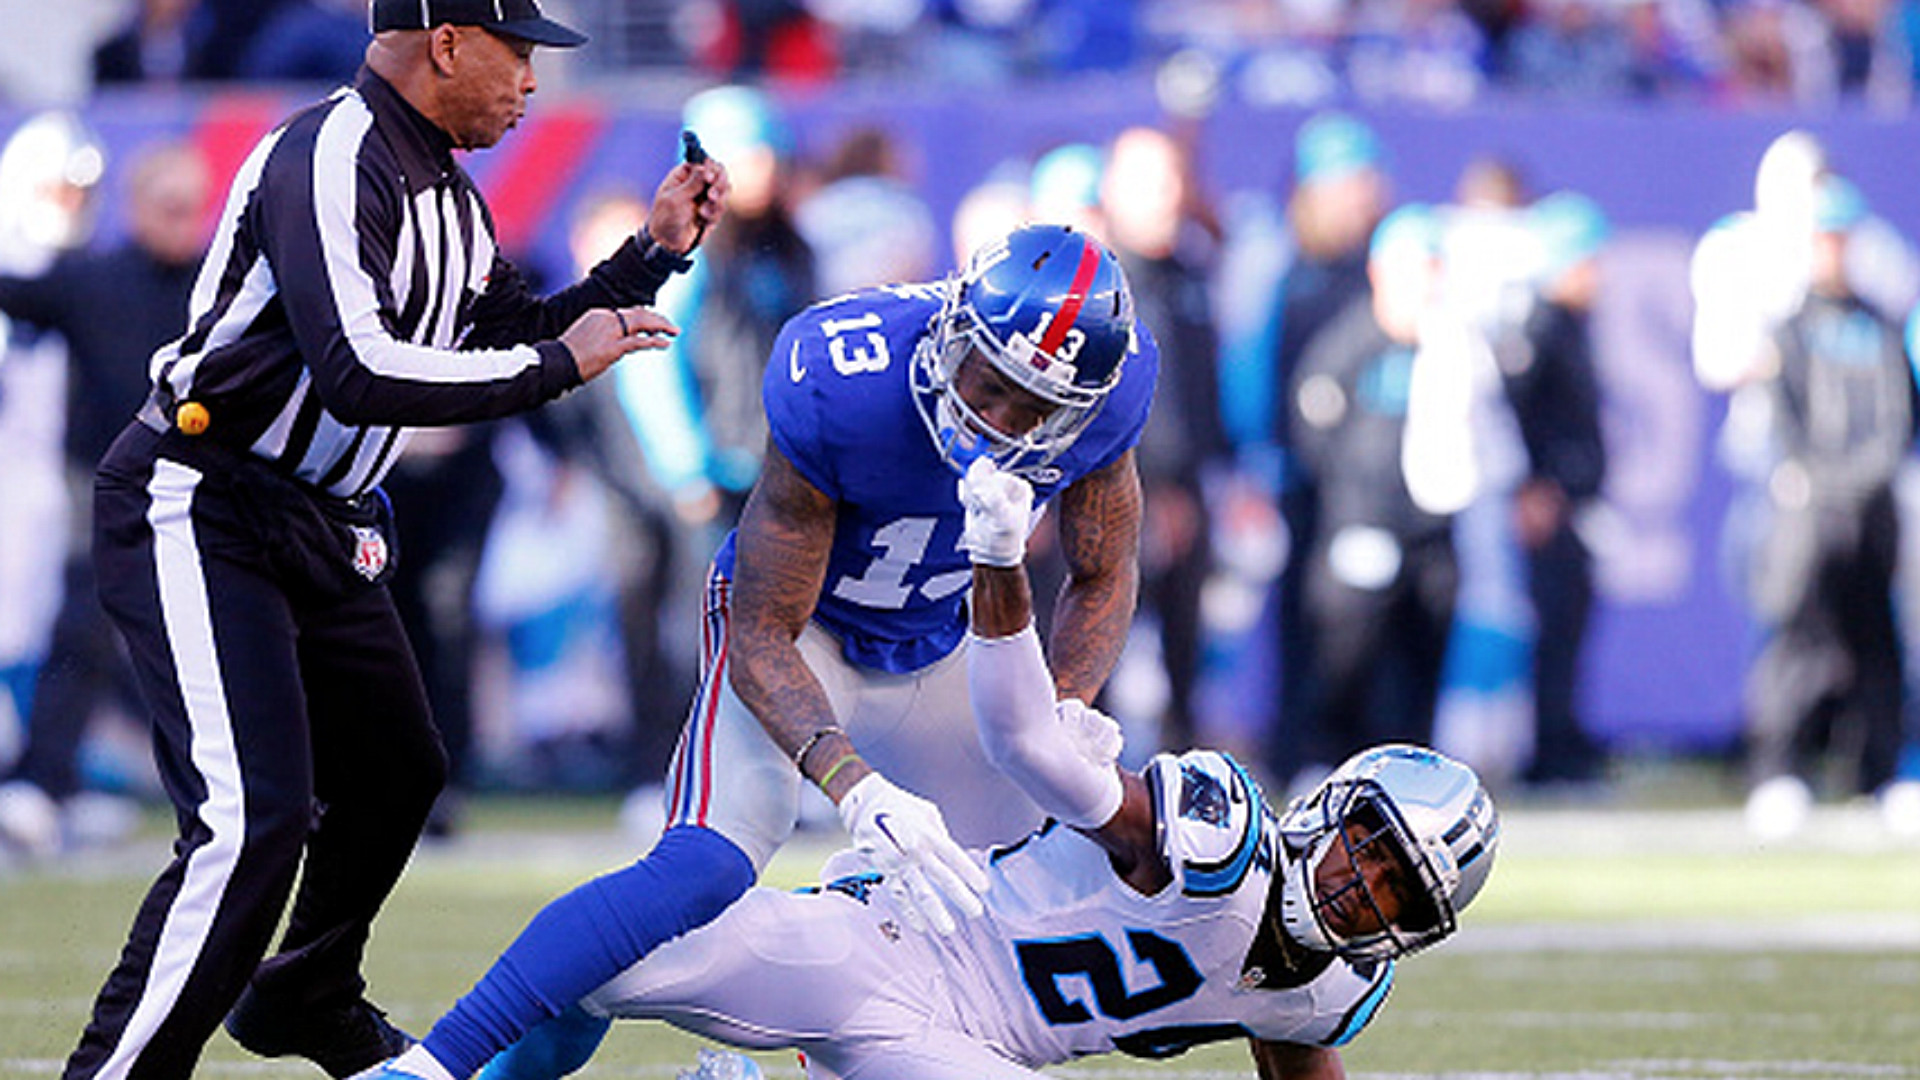 Josh Norman Odell Beckham Jr. is relevant because of a catch NFL Sporting News